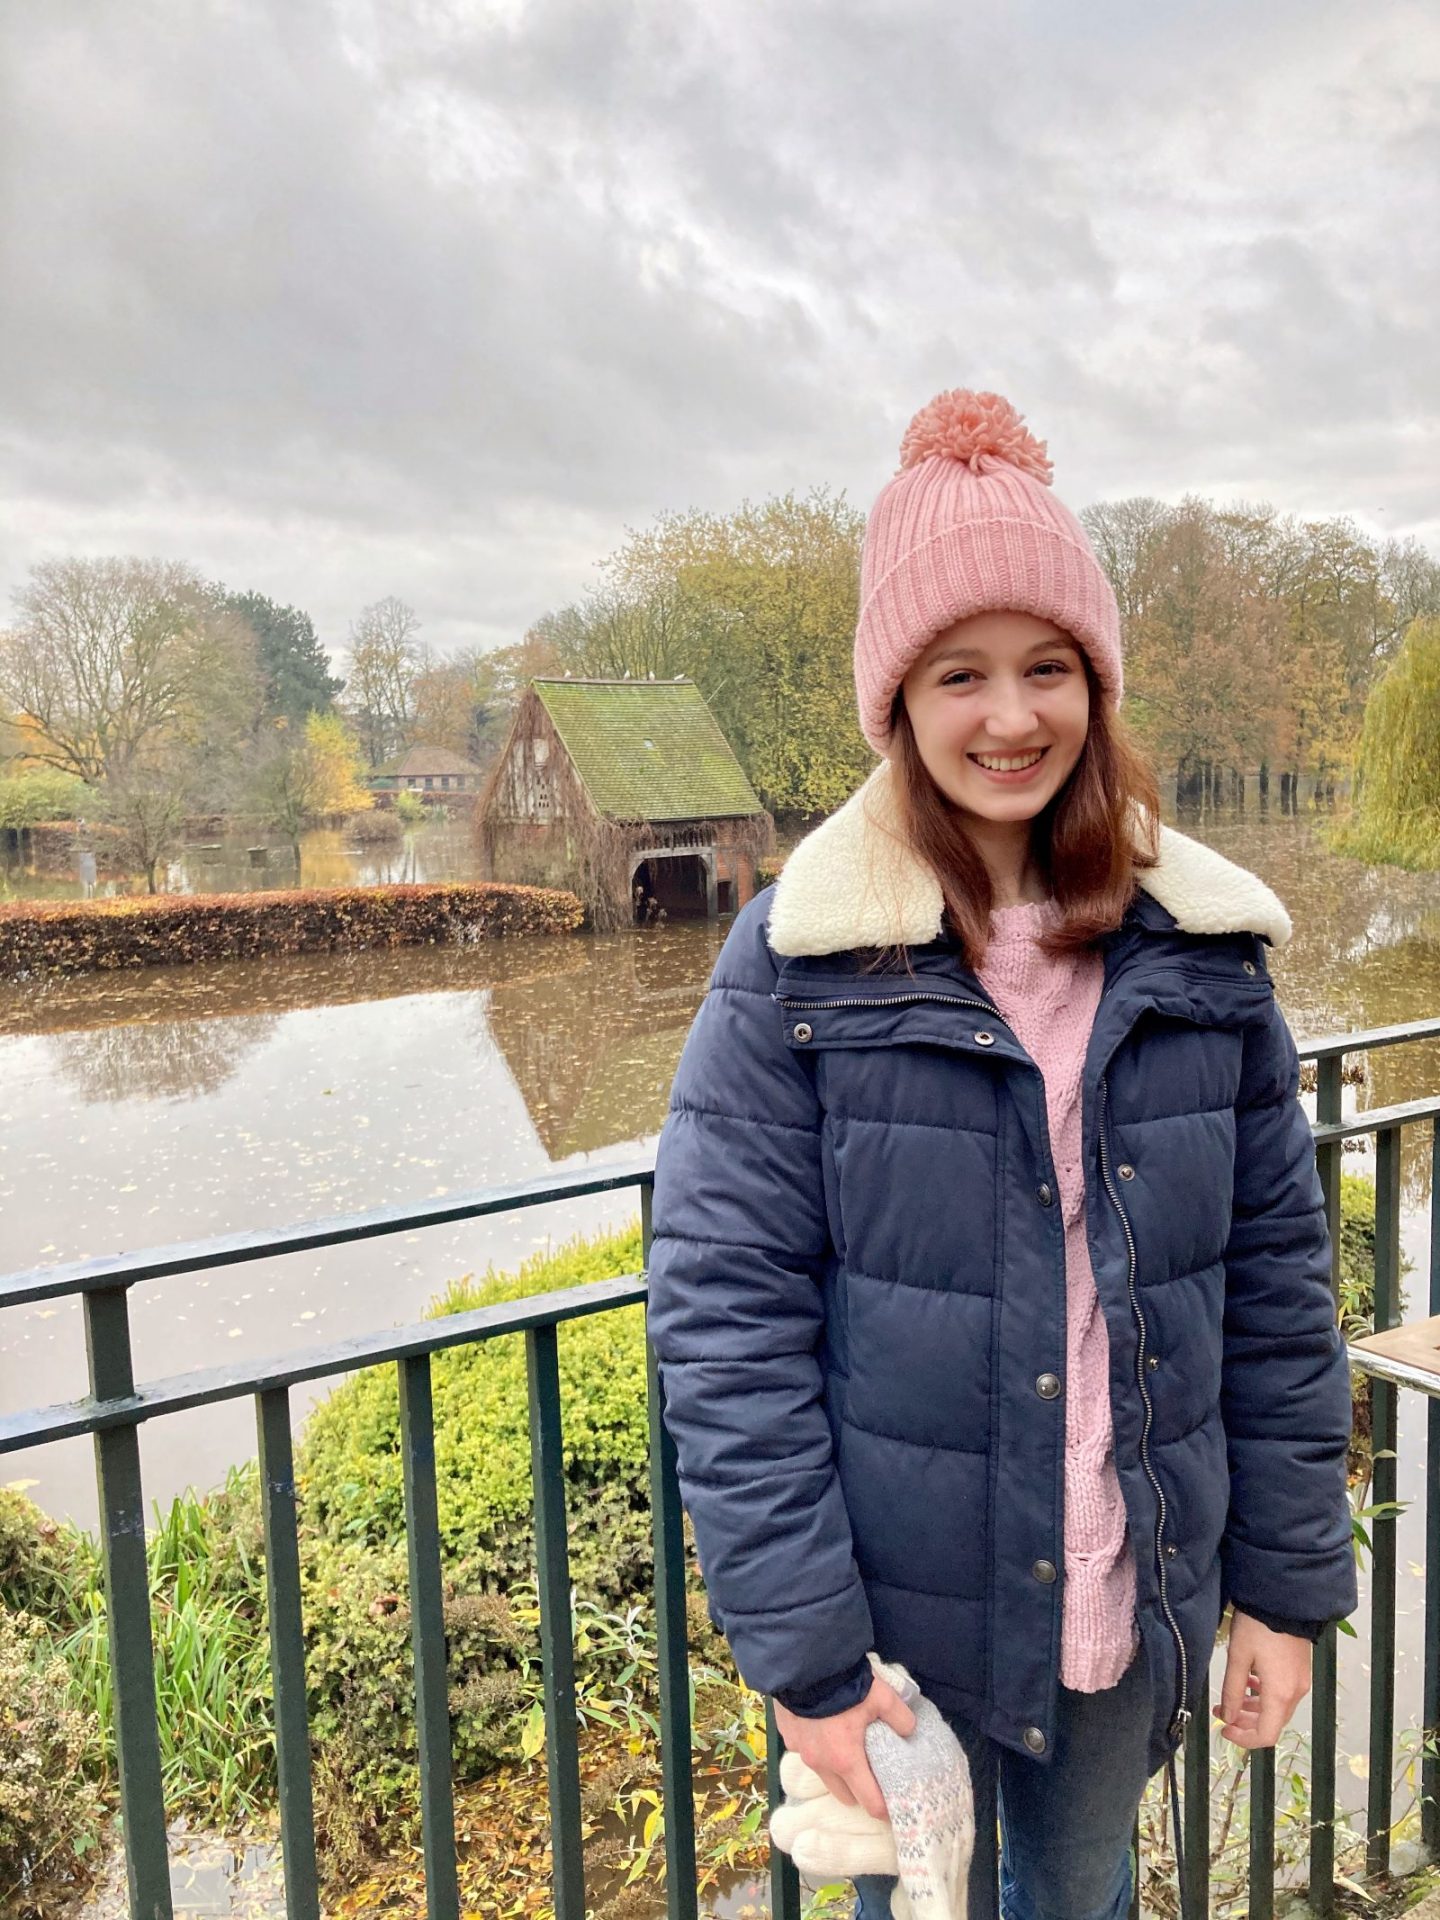 Pippa stood outdoors and smiling, wearing navy blue winter coat, lilac jumper and pale pink bobble hat. Park visible in back (rather flooded with water at the time!).